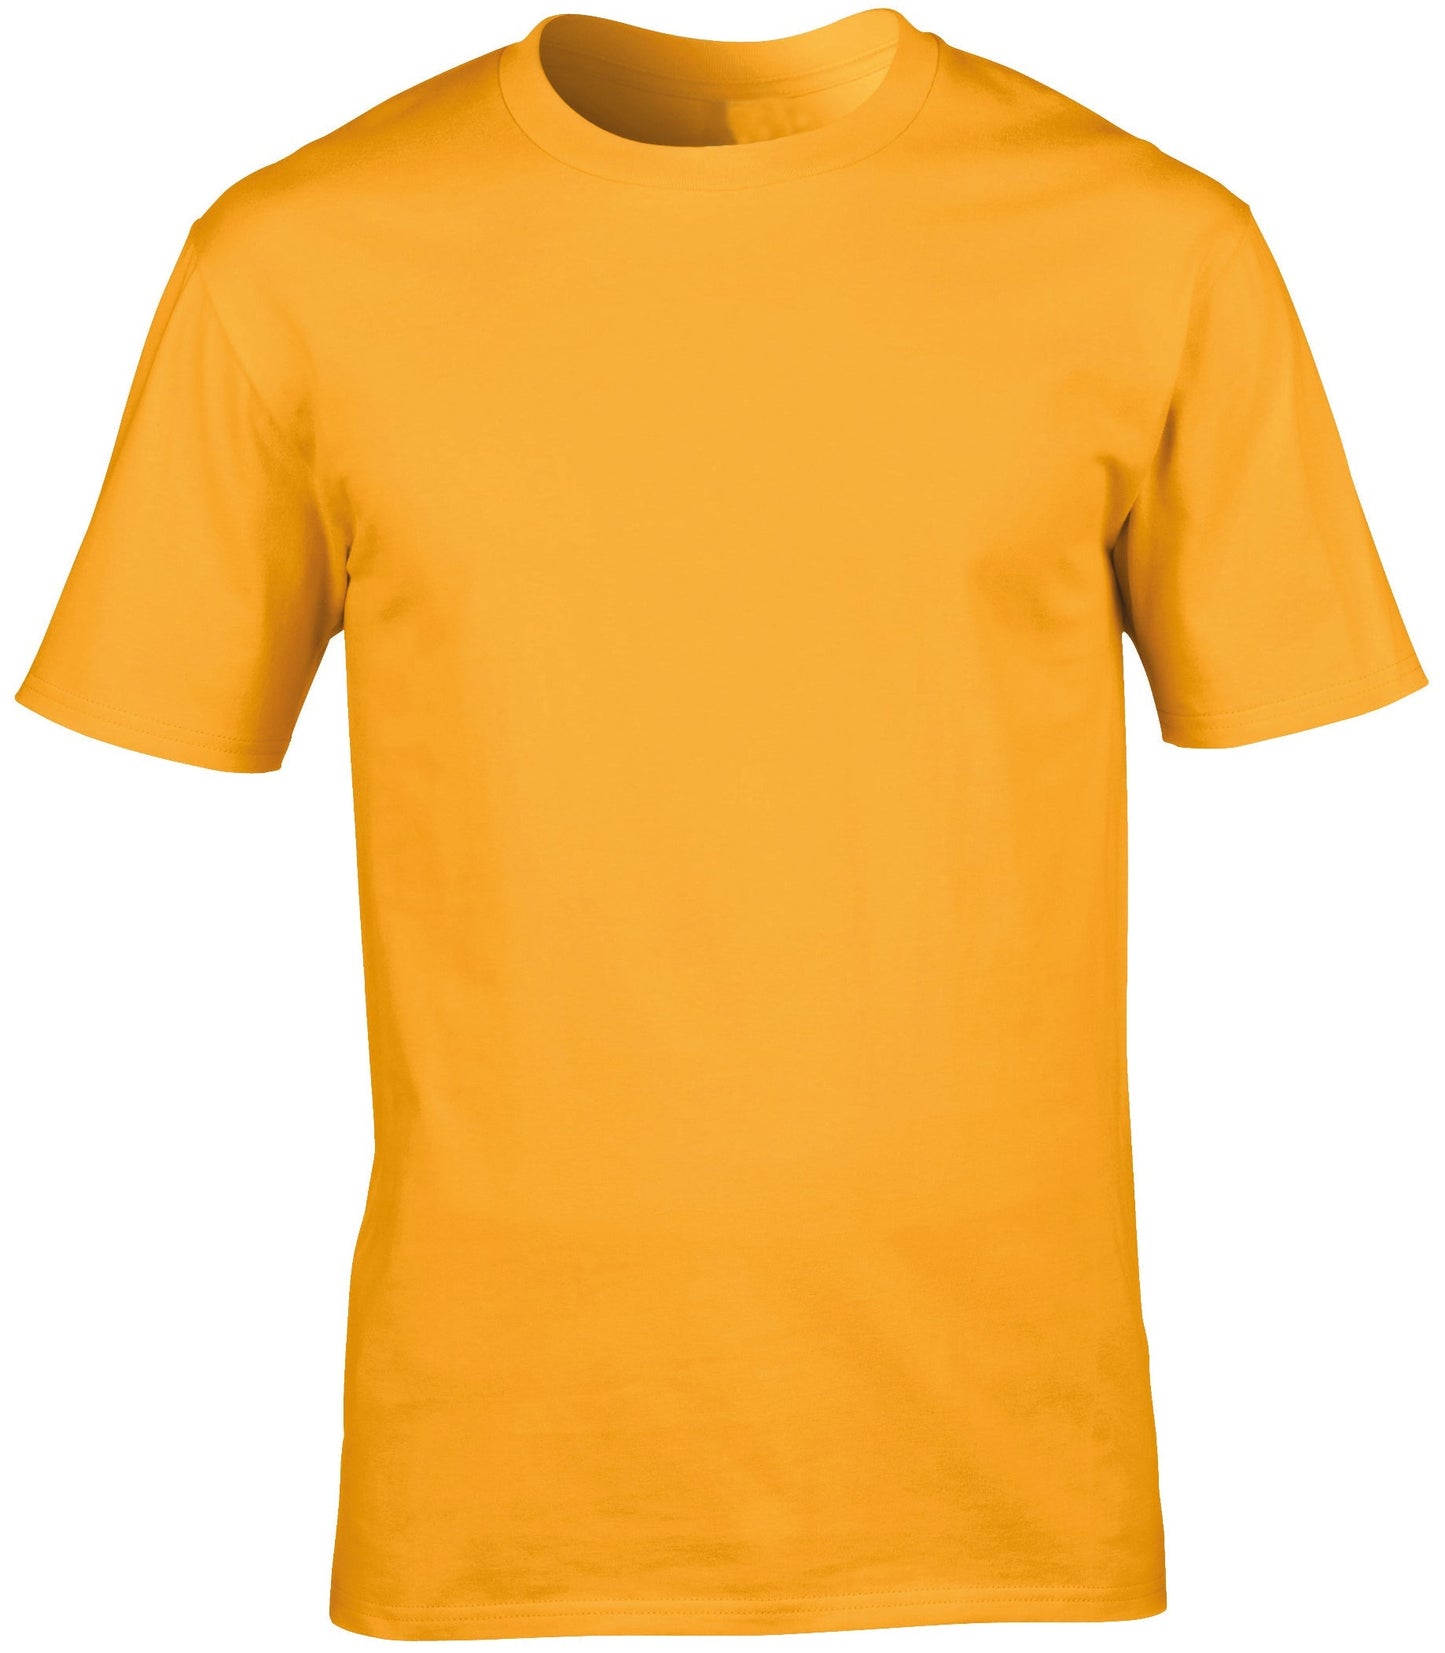 Your Logo Workwear Unisex T-shirt Save £3 per item when ordering 5 or more!